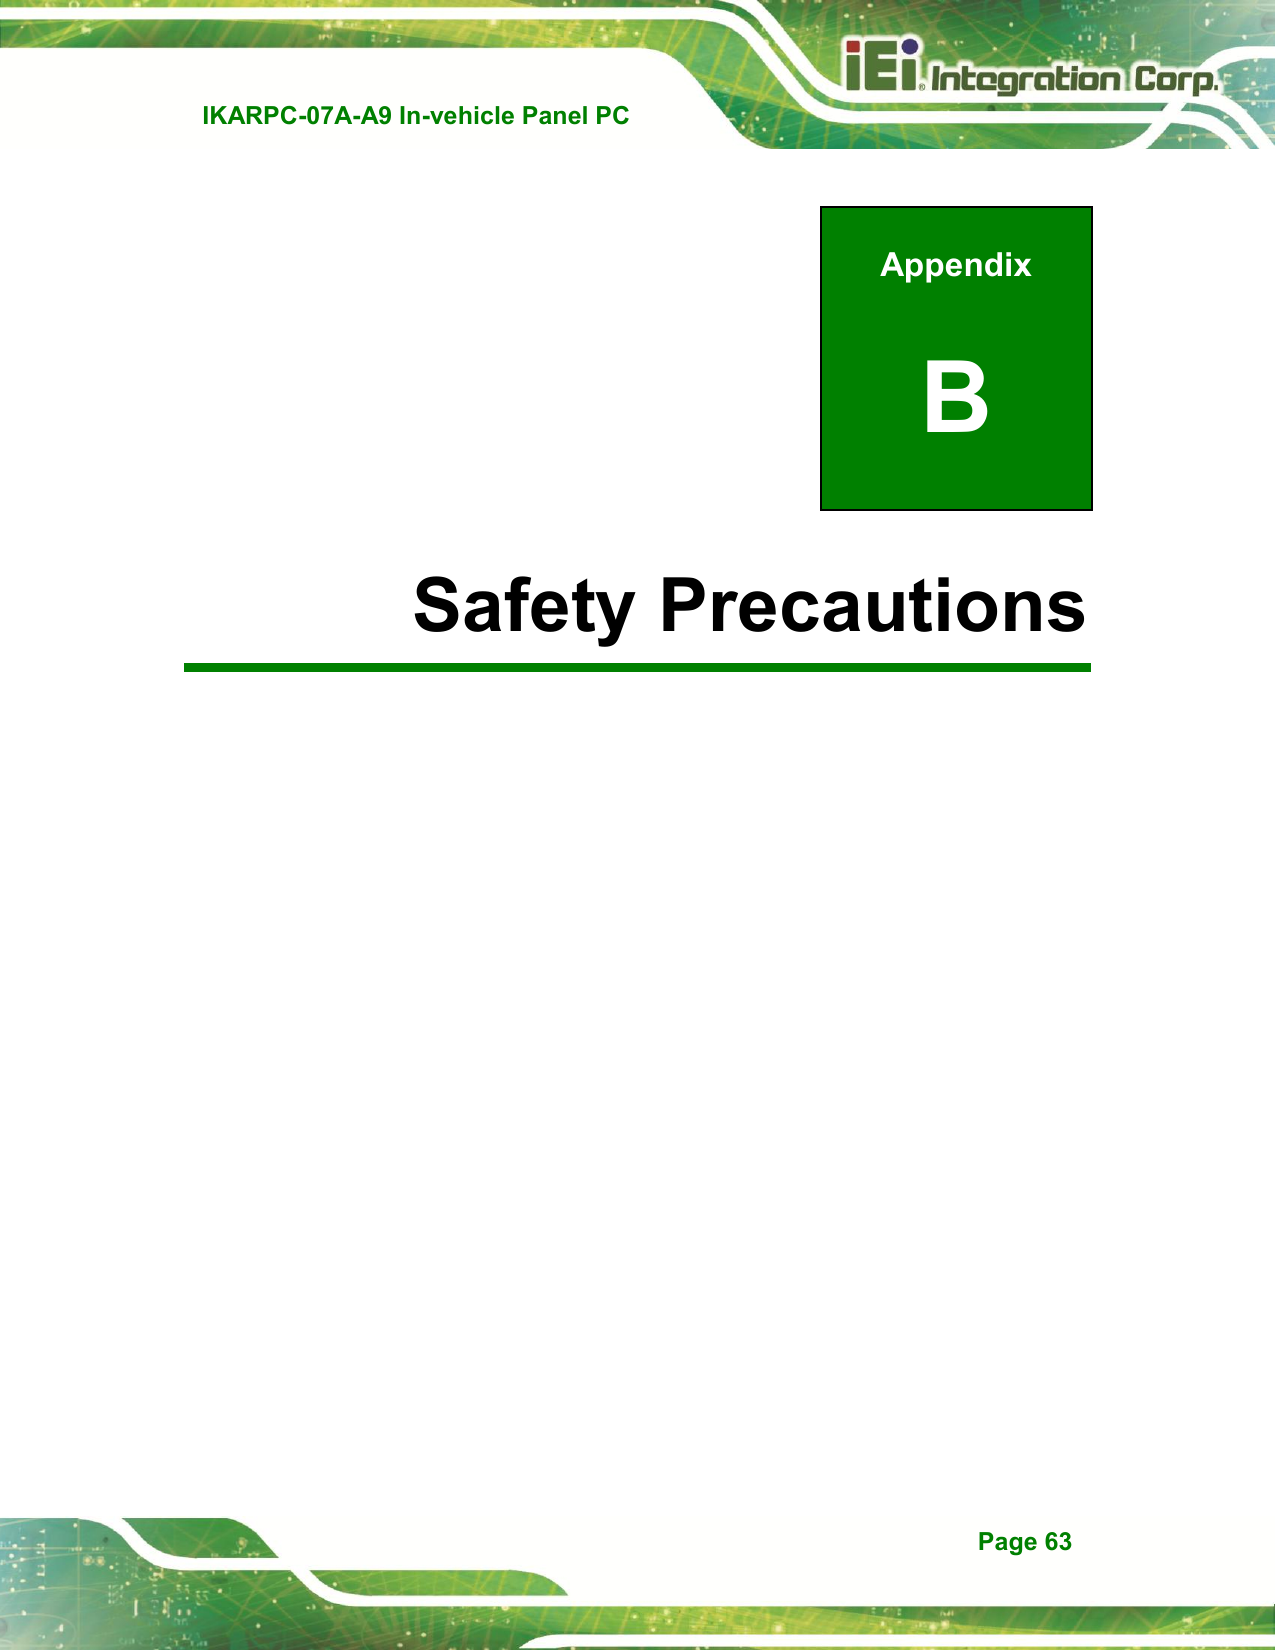   IKARPC-07A-A9 In-vehicle Panel PC  Page 63 Appendix B B Safety Precautions 